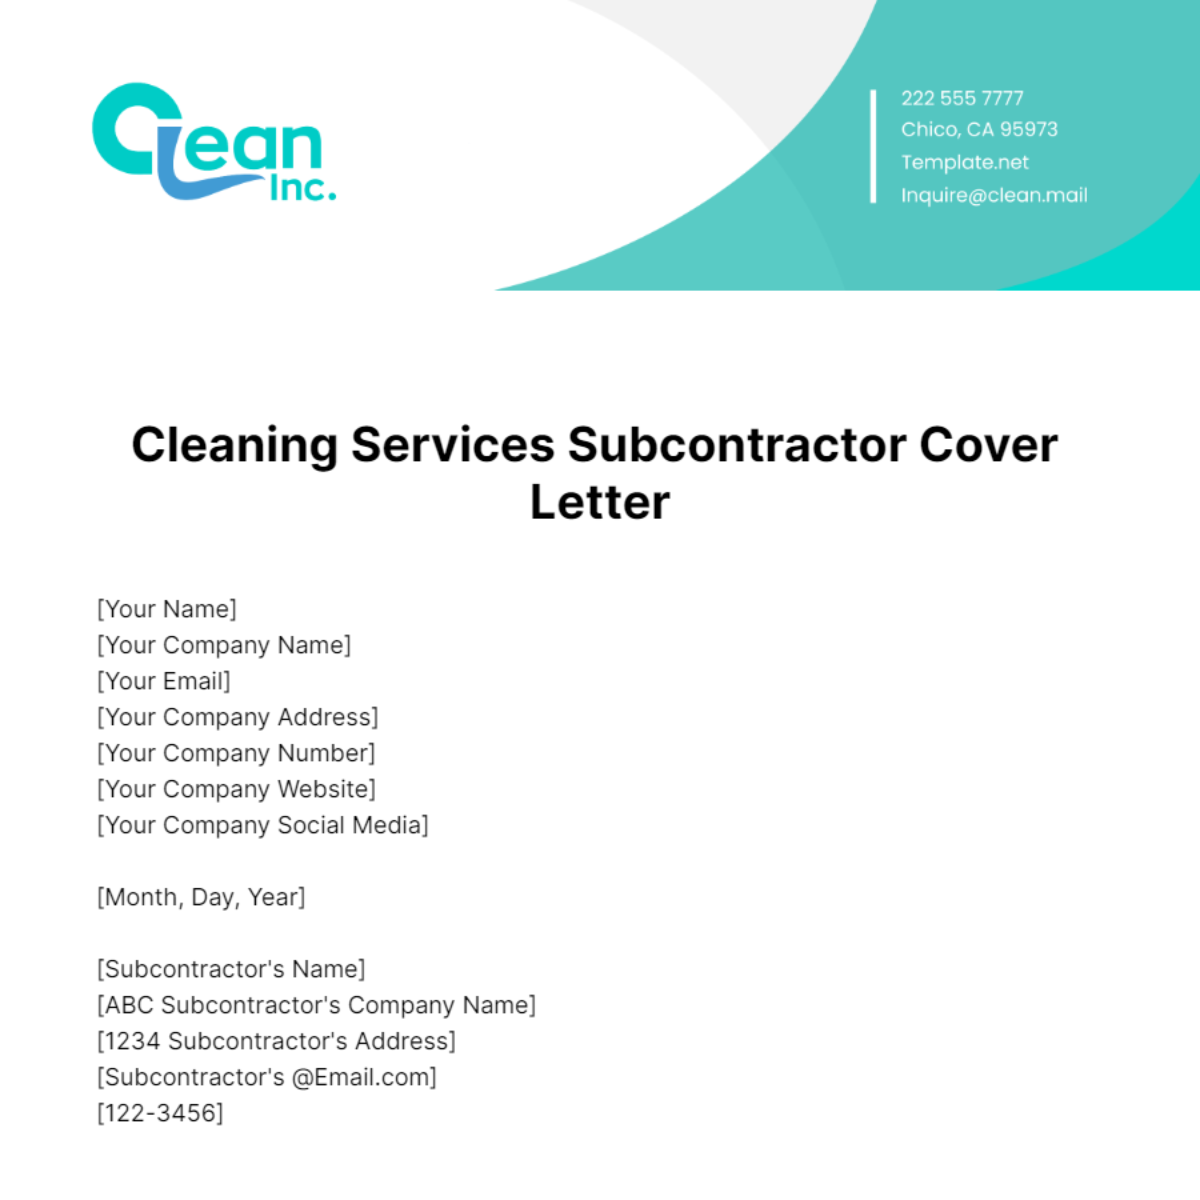 Cleaning Services Subcontractor Cover Letter Template